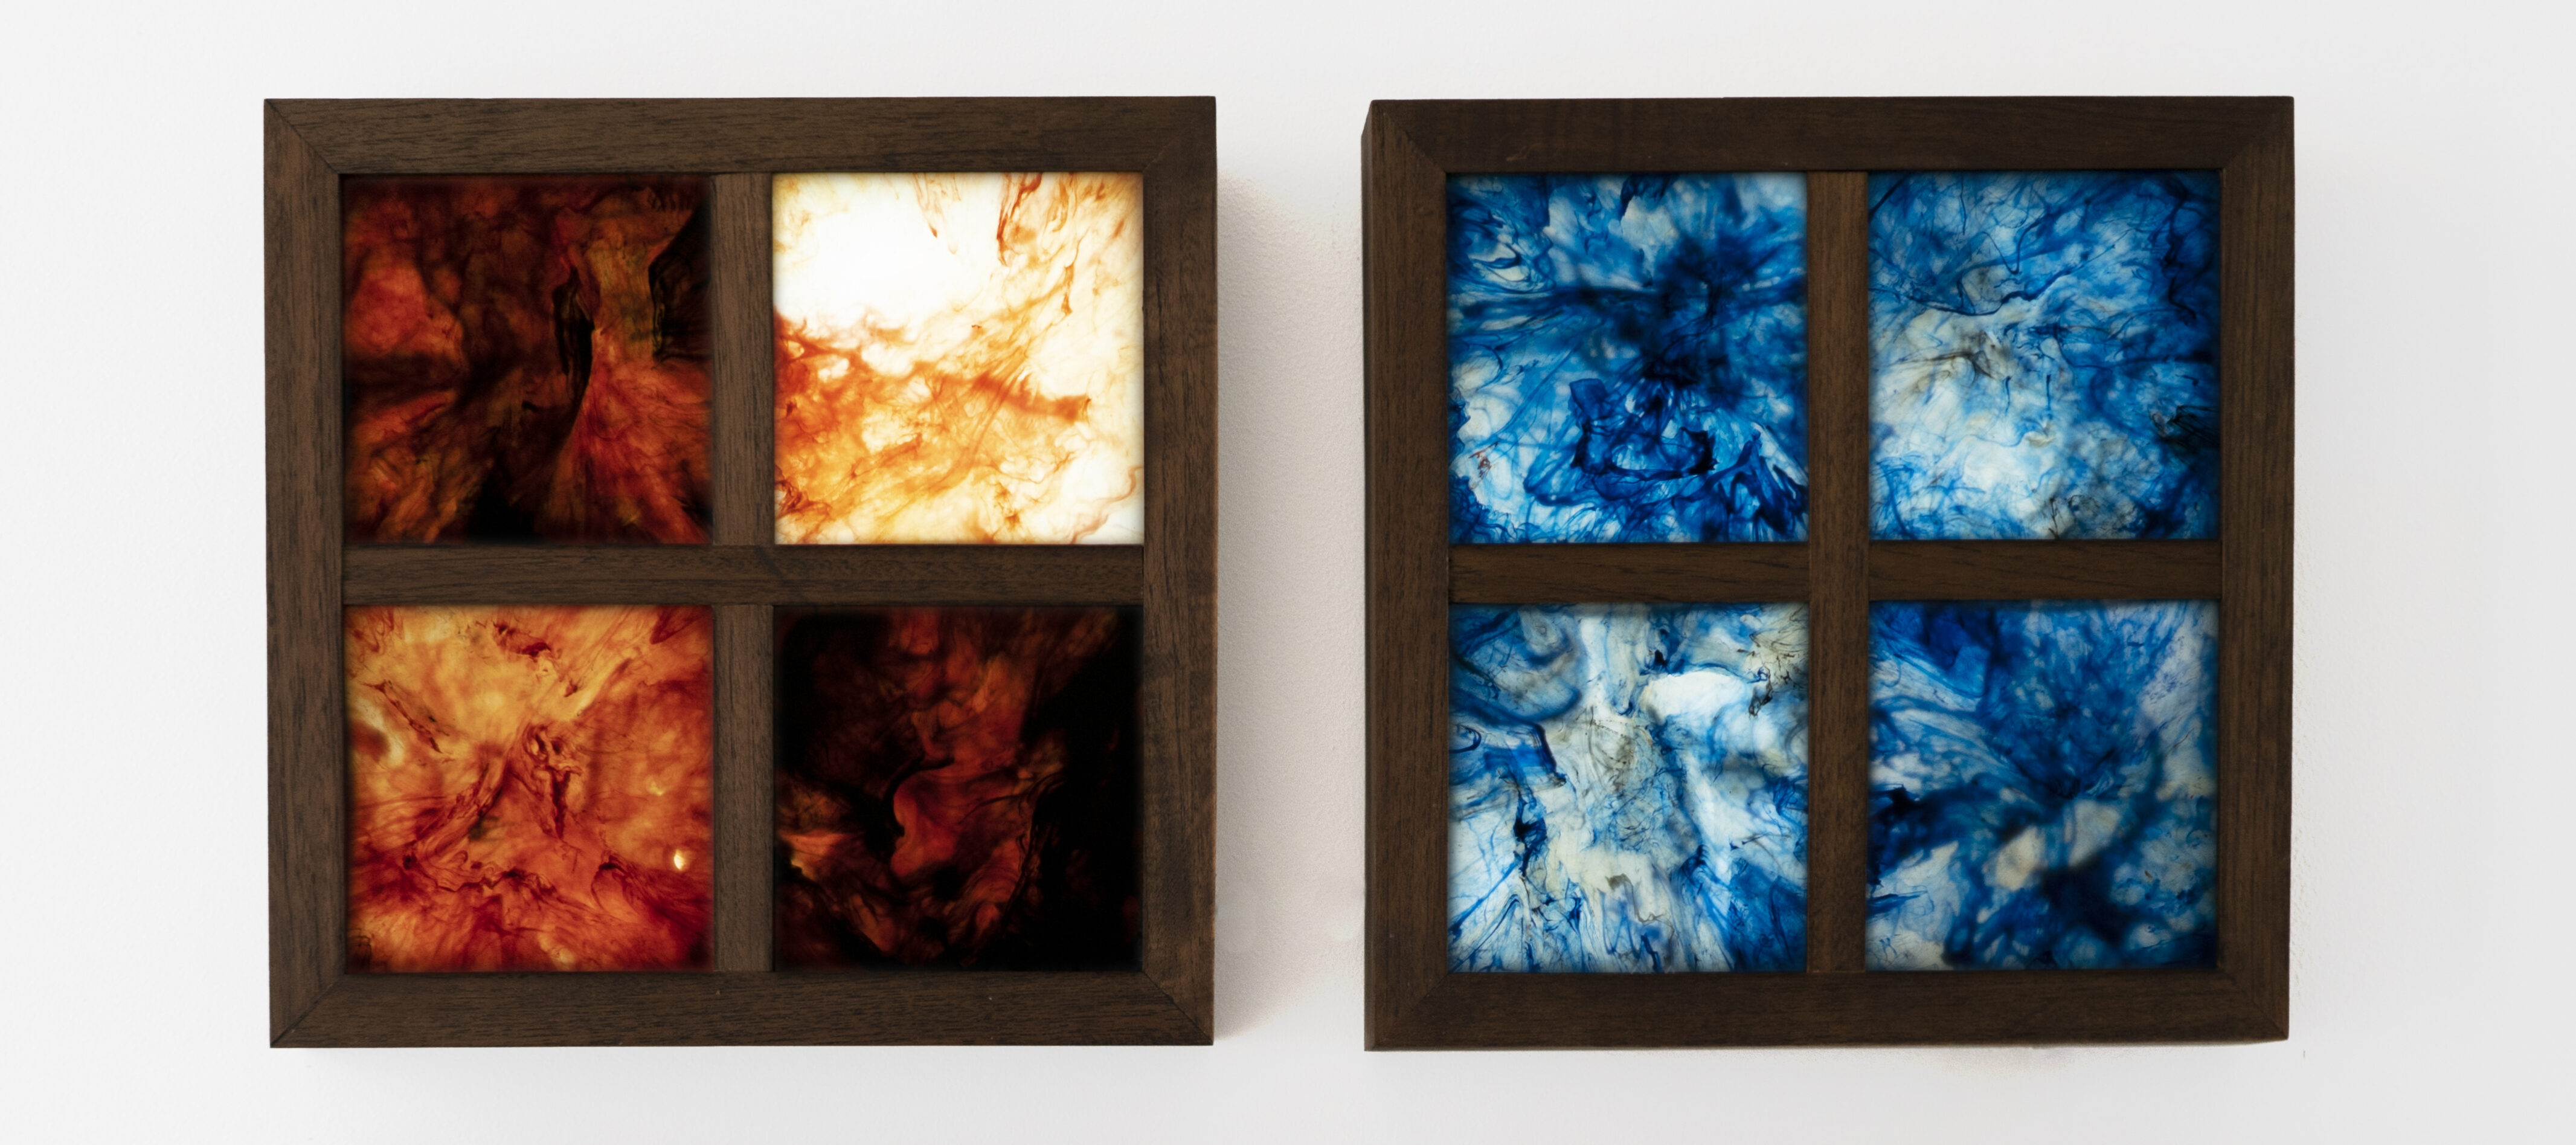 Four square frames feature four quadrants of abstract patterns and a specific color palette: light and dark blue; mossy green; orange and red; pink and purple.